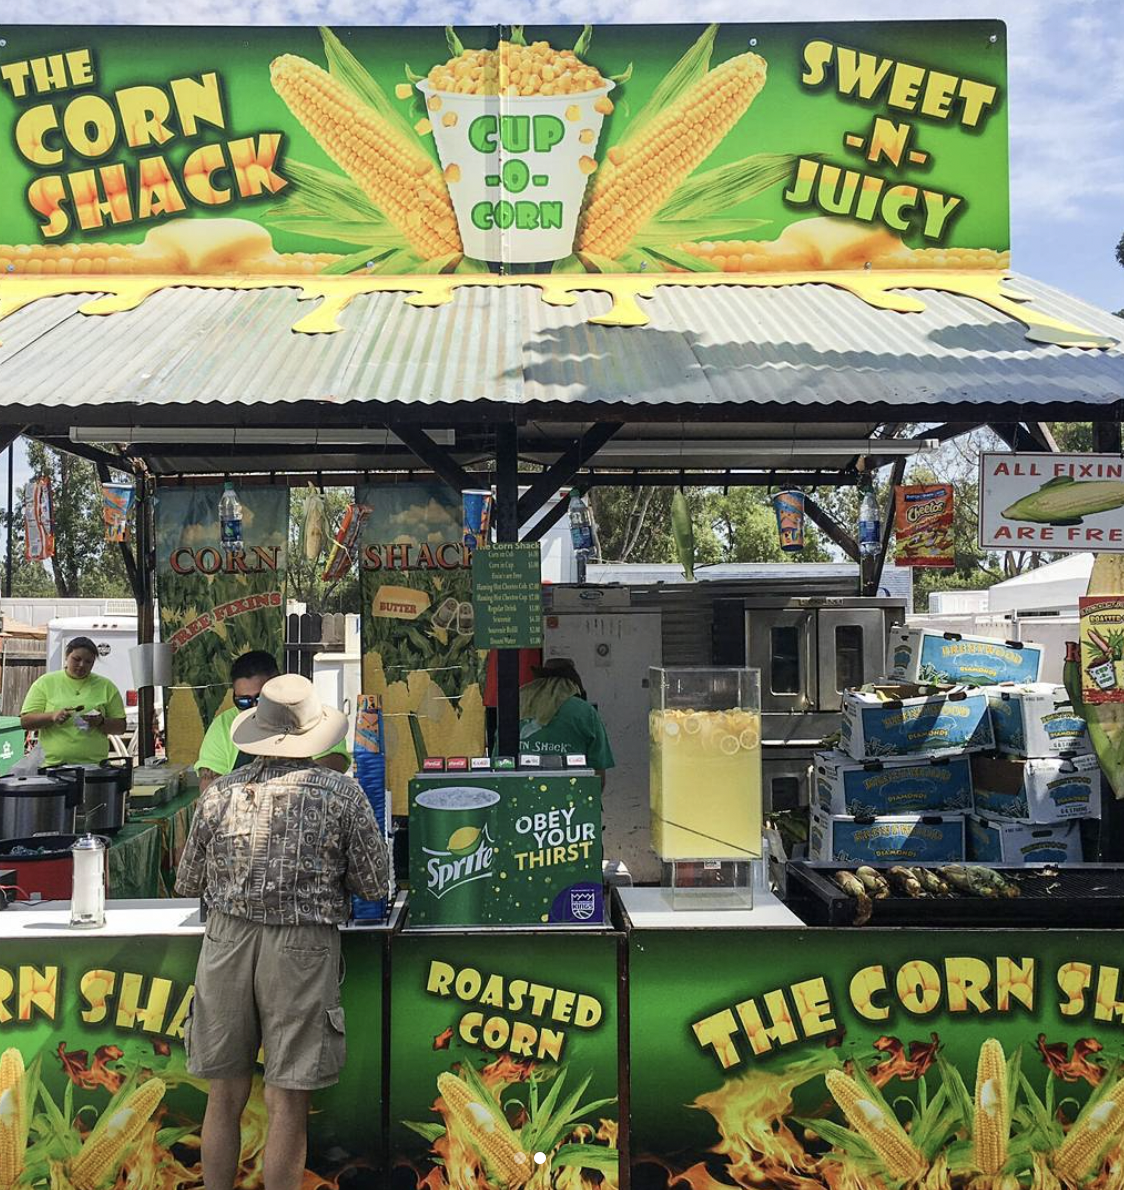 stall - The Corn Shack Cup 0 Corn Ishlach Sweet N Juicy All Fixin Are Fre Rn Sha Sprite Obey Your Thirst Roasted Corn The Corn Sl